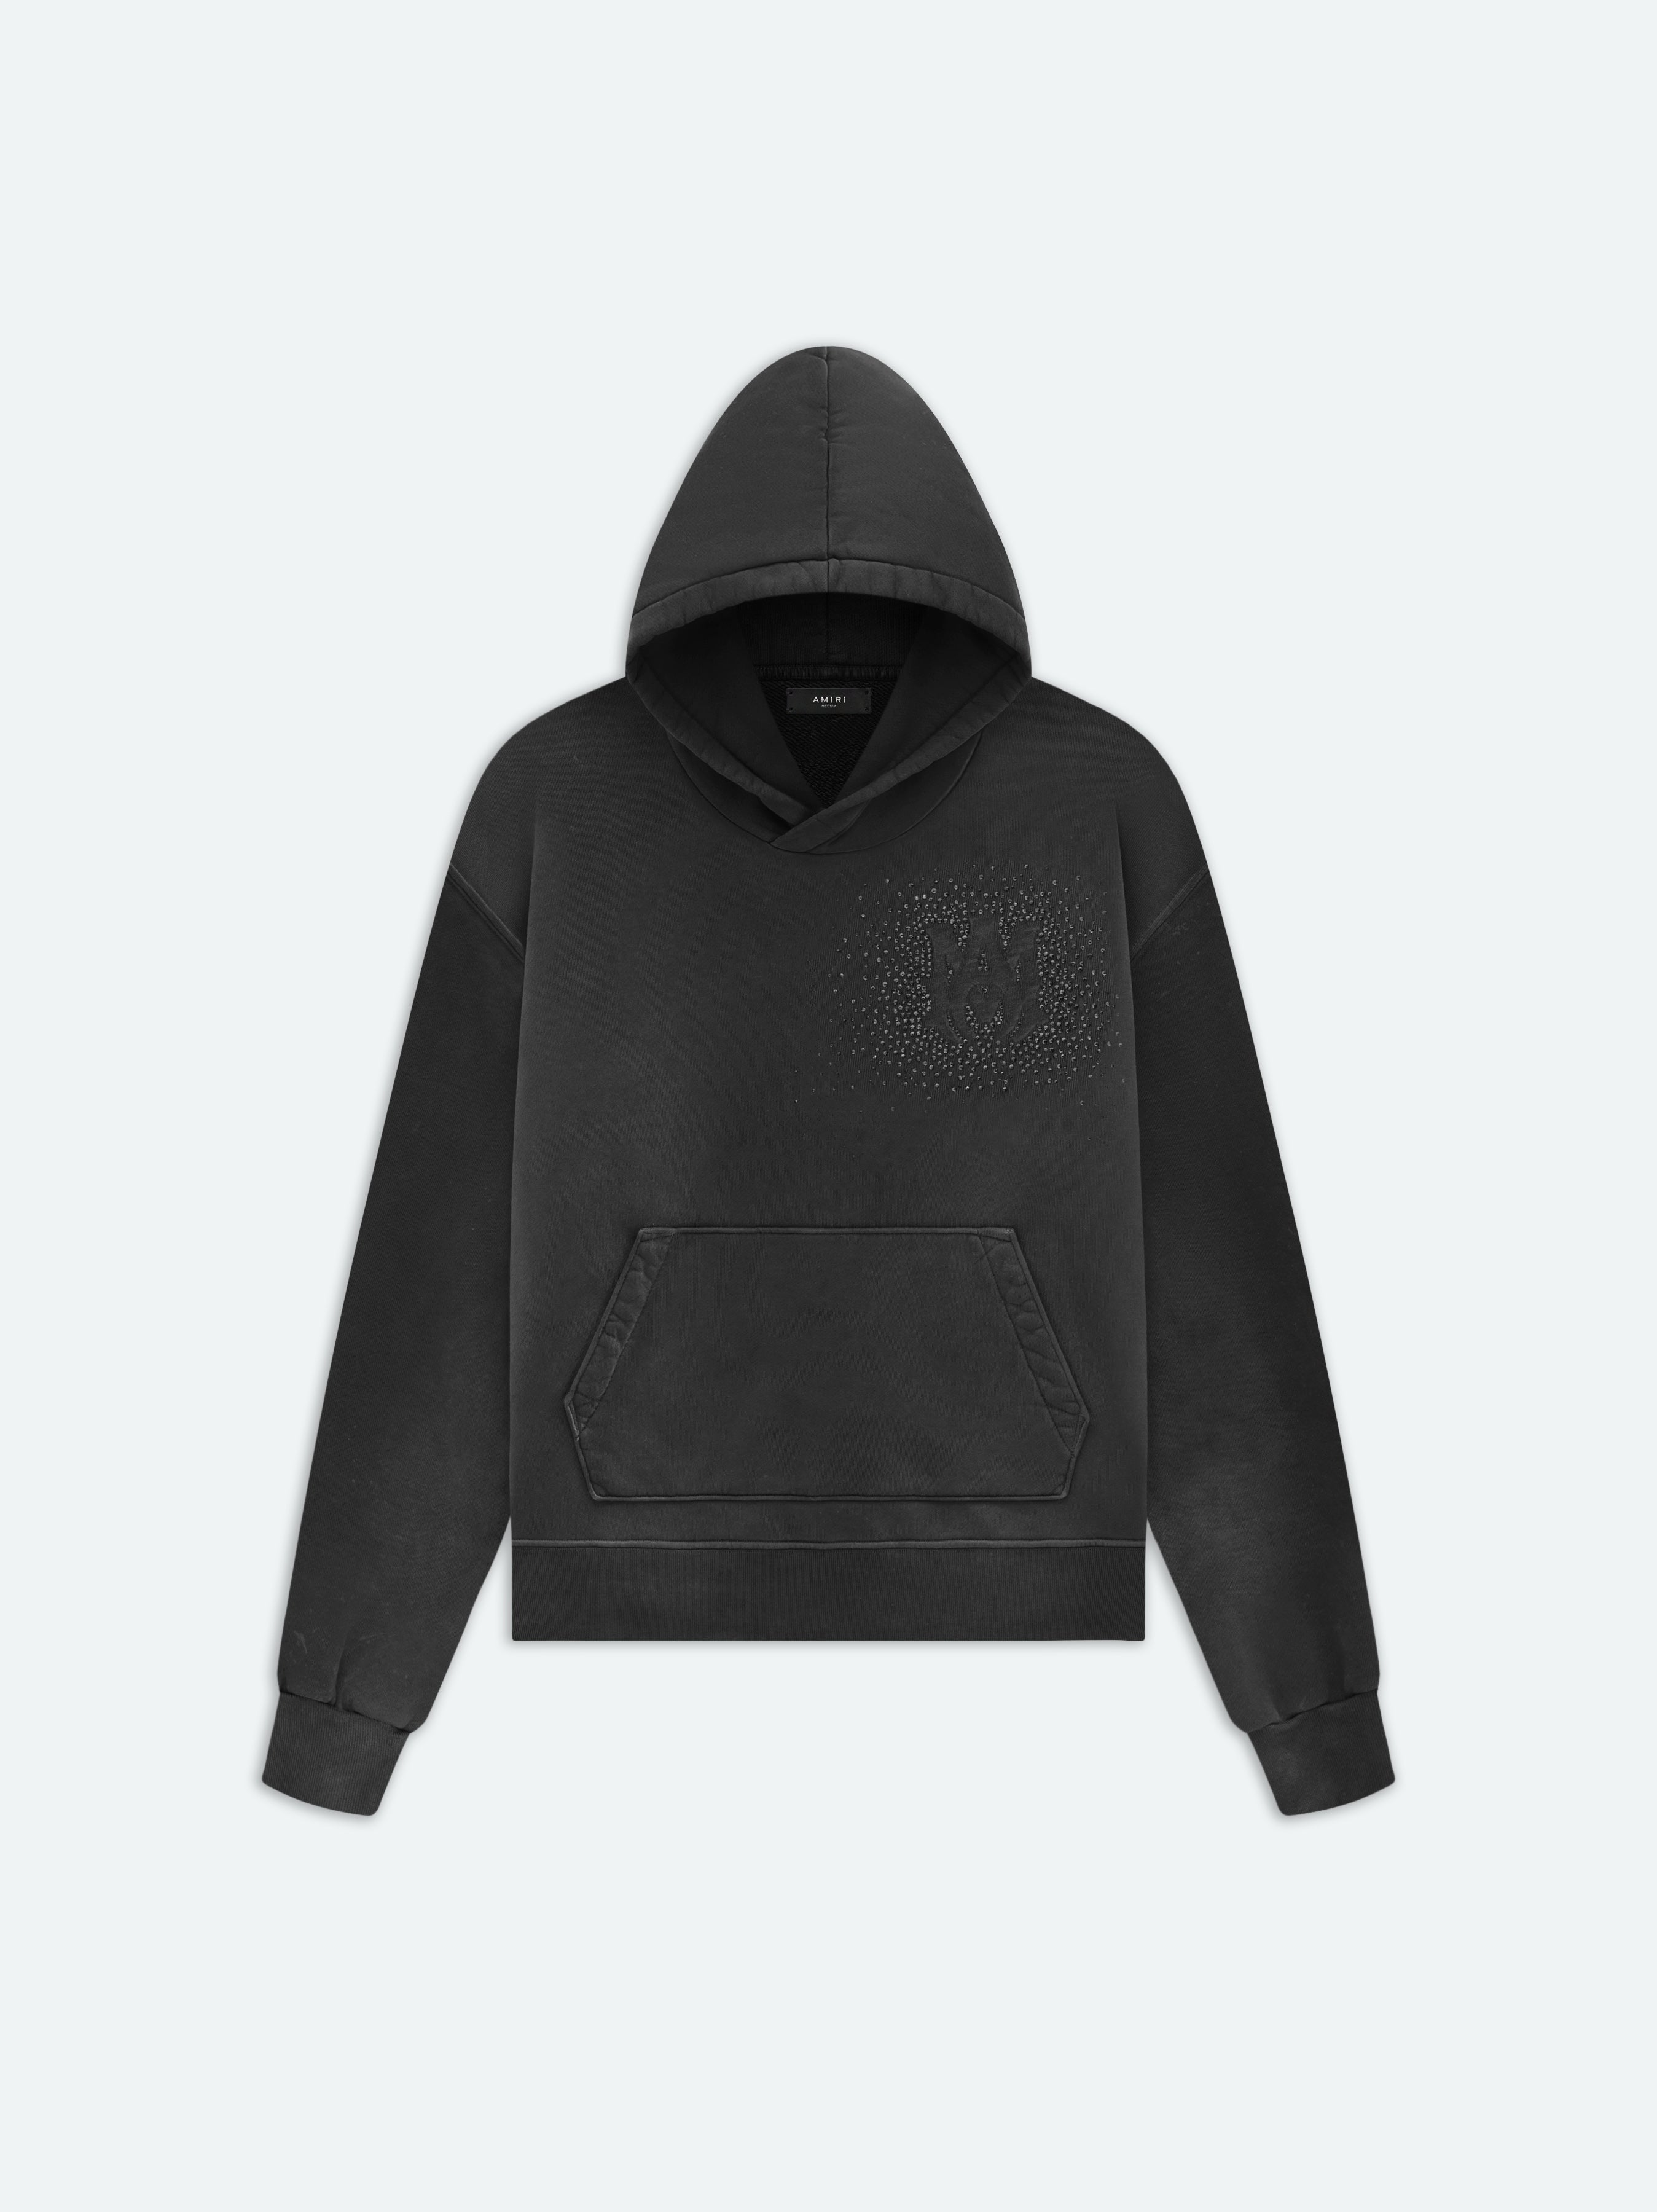 Product CRYSTAL BURST HOODIE- Faded Black featured image